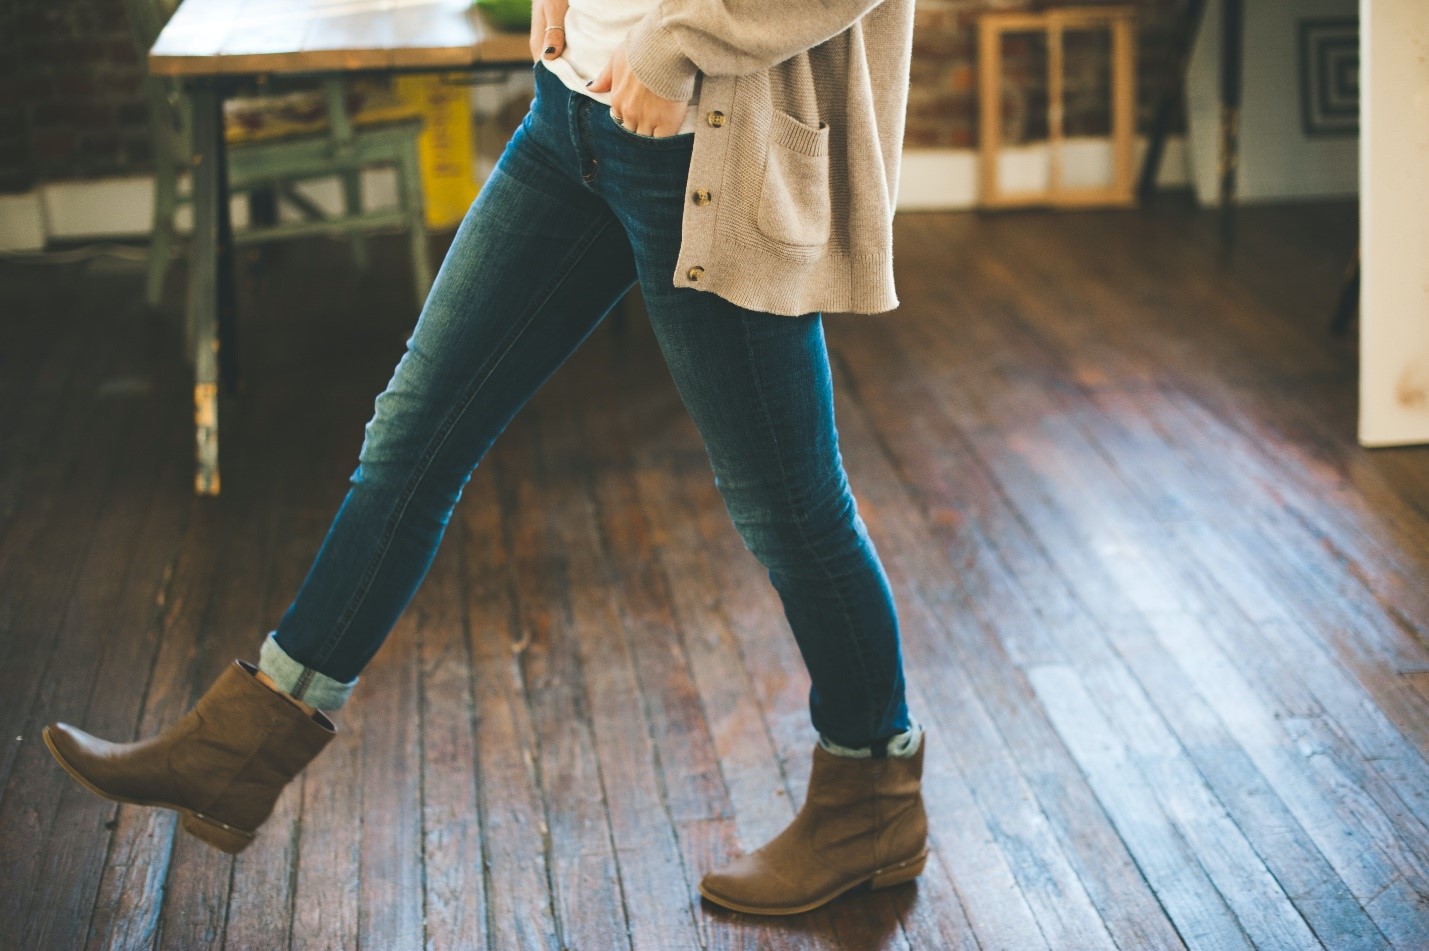 The 7 Sturdy Work Boots for Hard Working Ladies